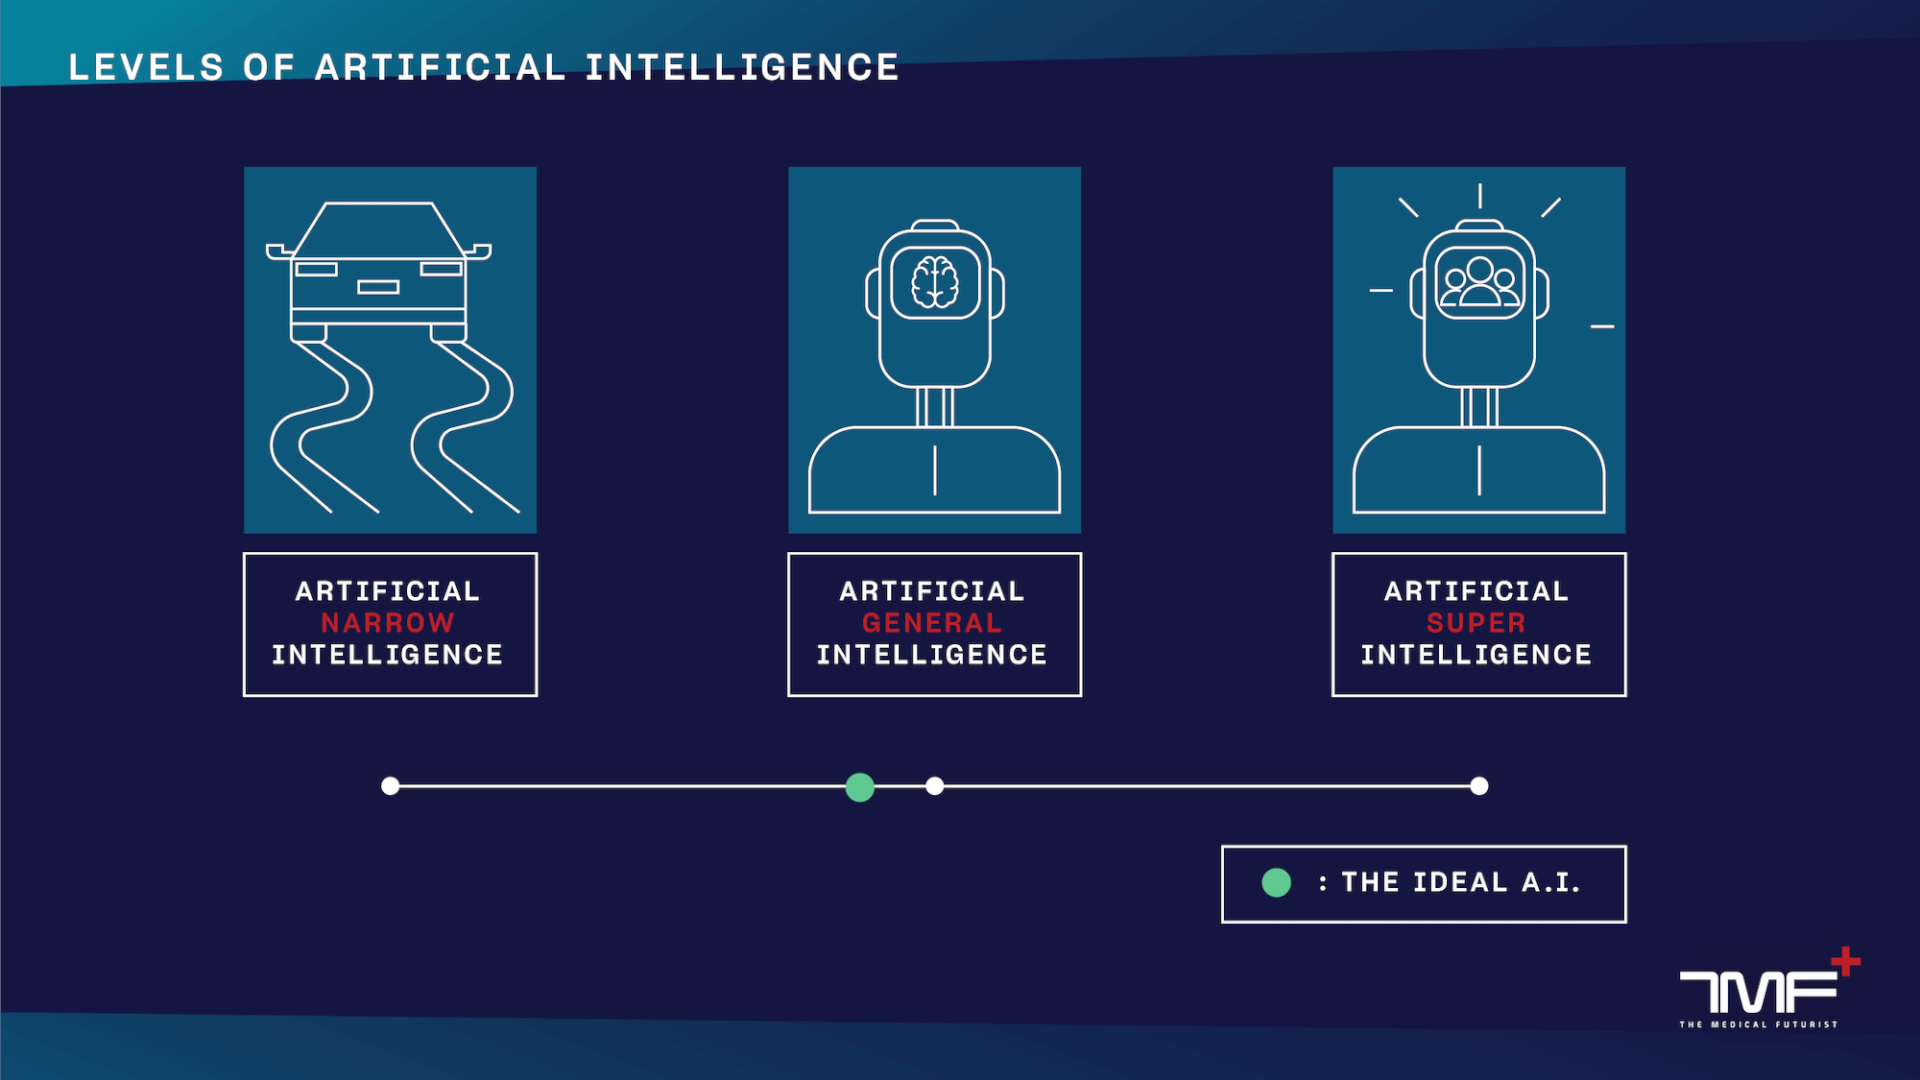 A Physician’s Visual Guide To Artificial Intelligence